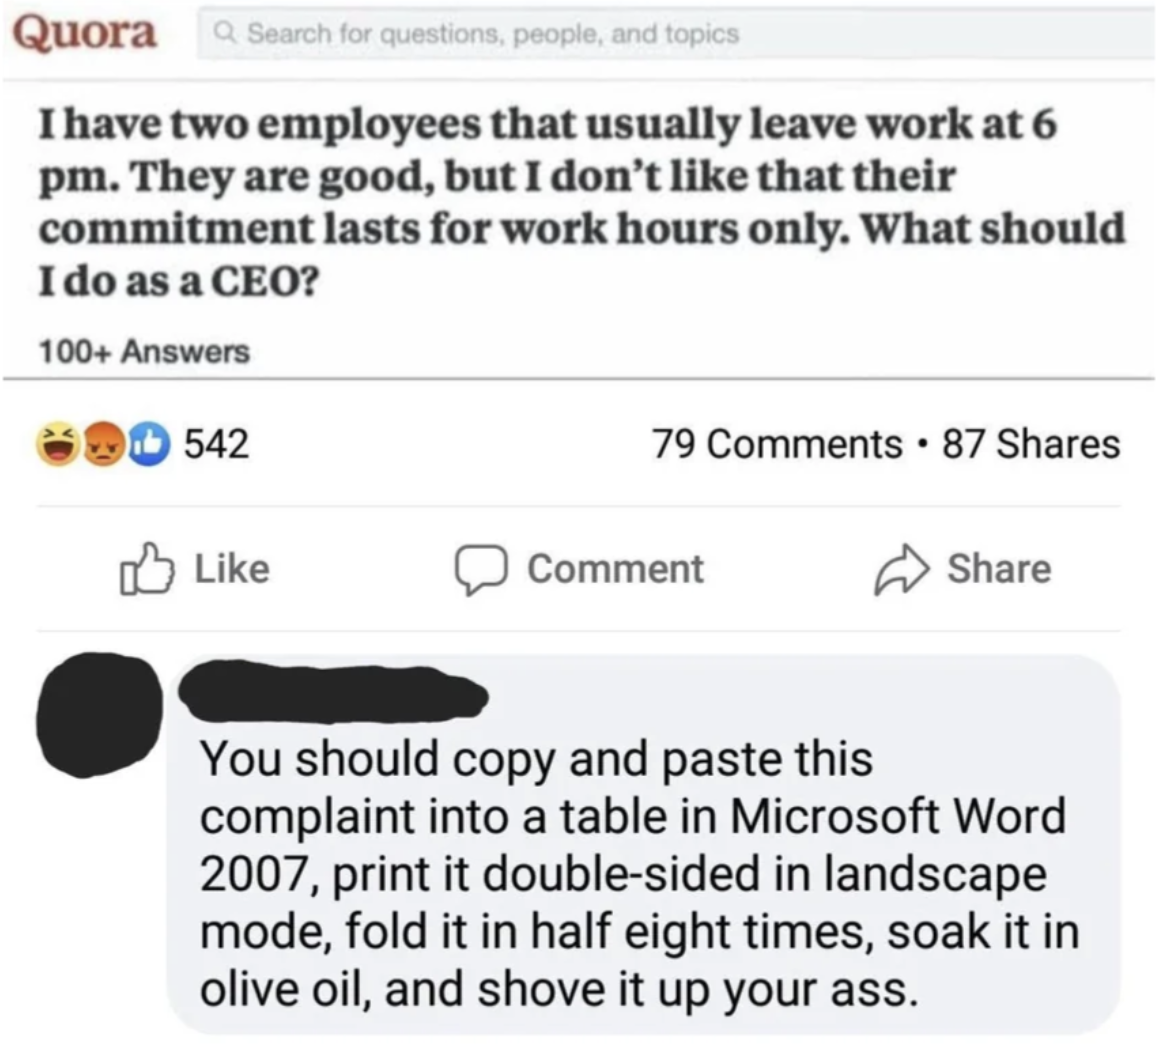 The image shows a screenshot of a social media post with a question about CEO work hours, and a humorous sarcastic response